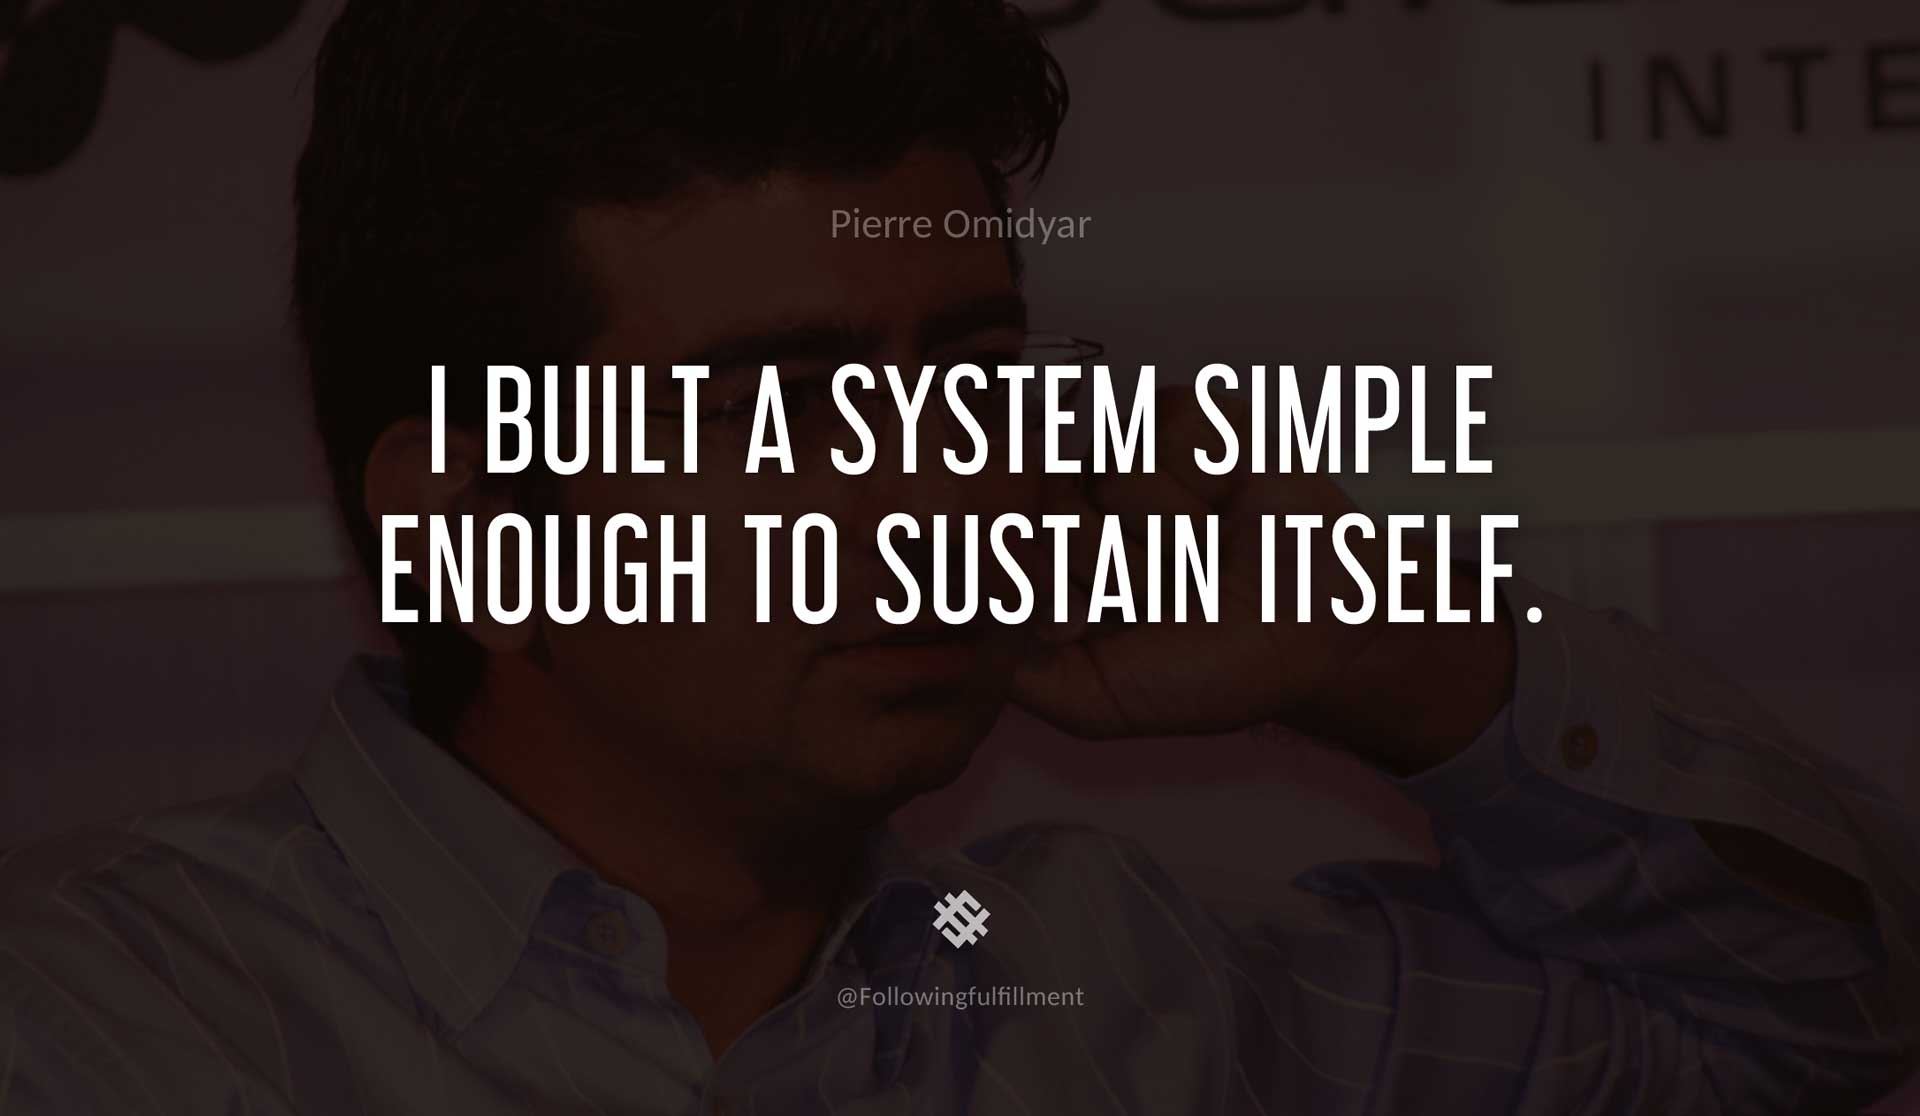 I-built-a-system-simple-enough-to-sustain-itself.-PIERRE-OMIDYAR-Quote.jpg